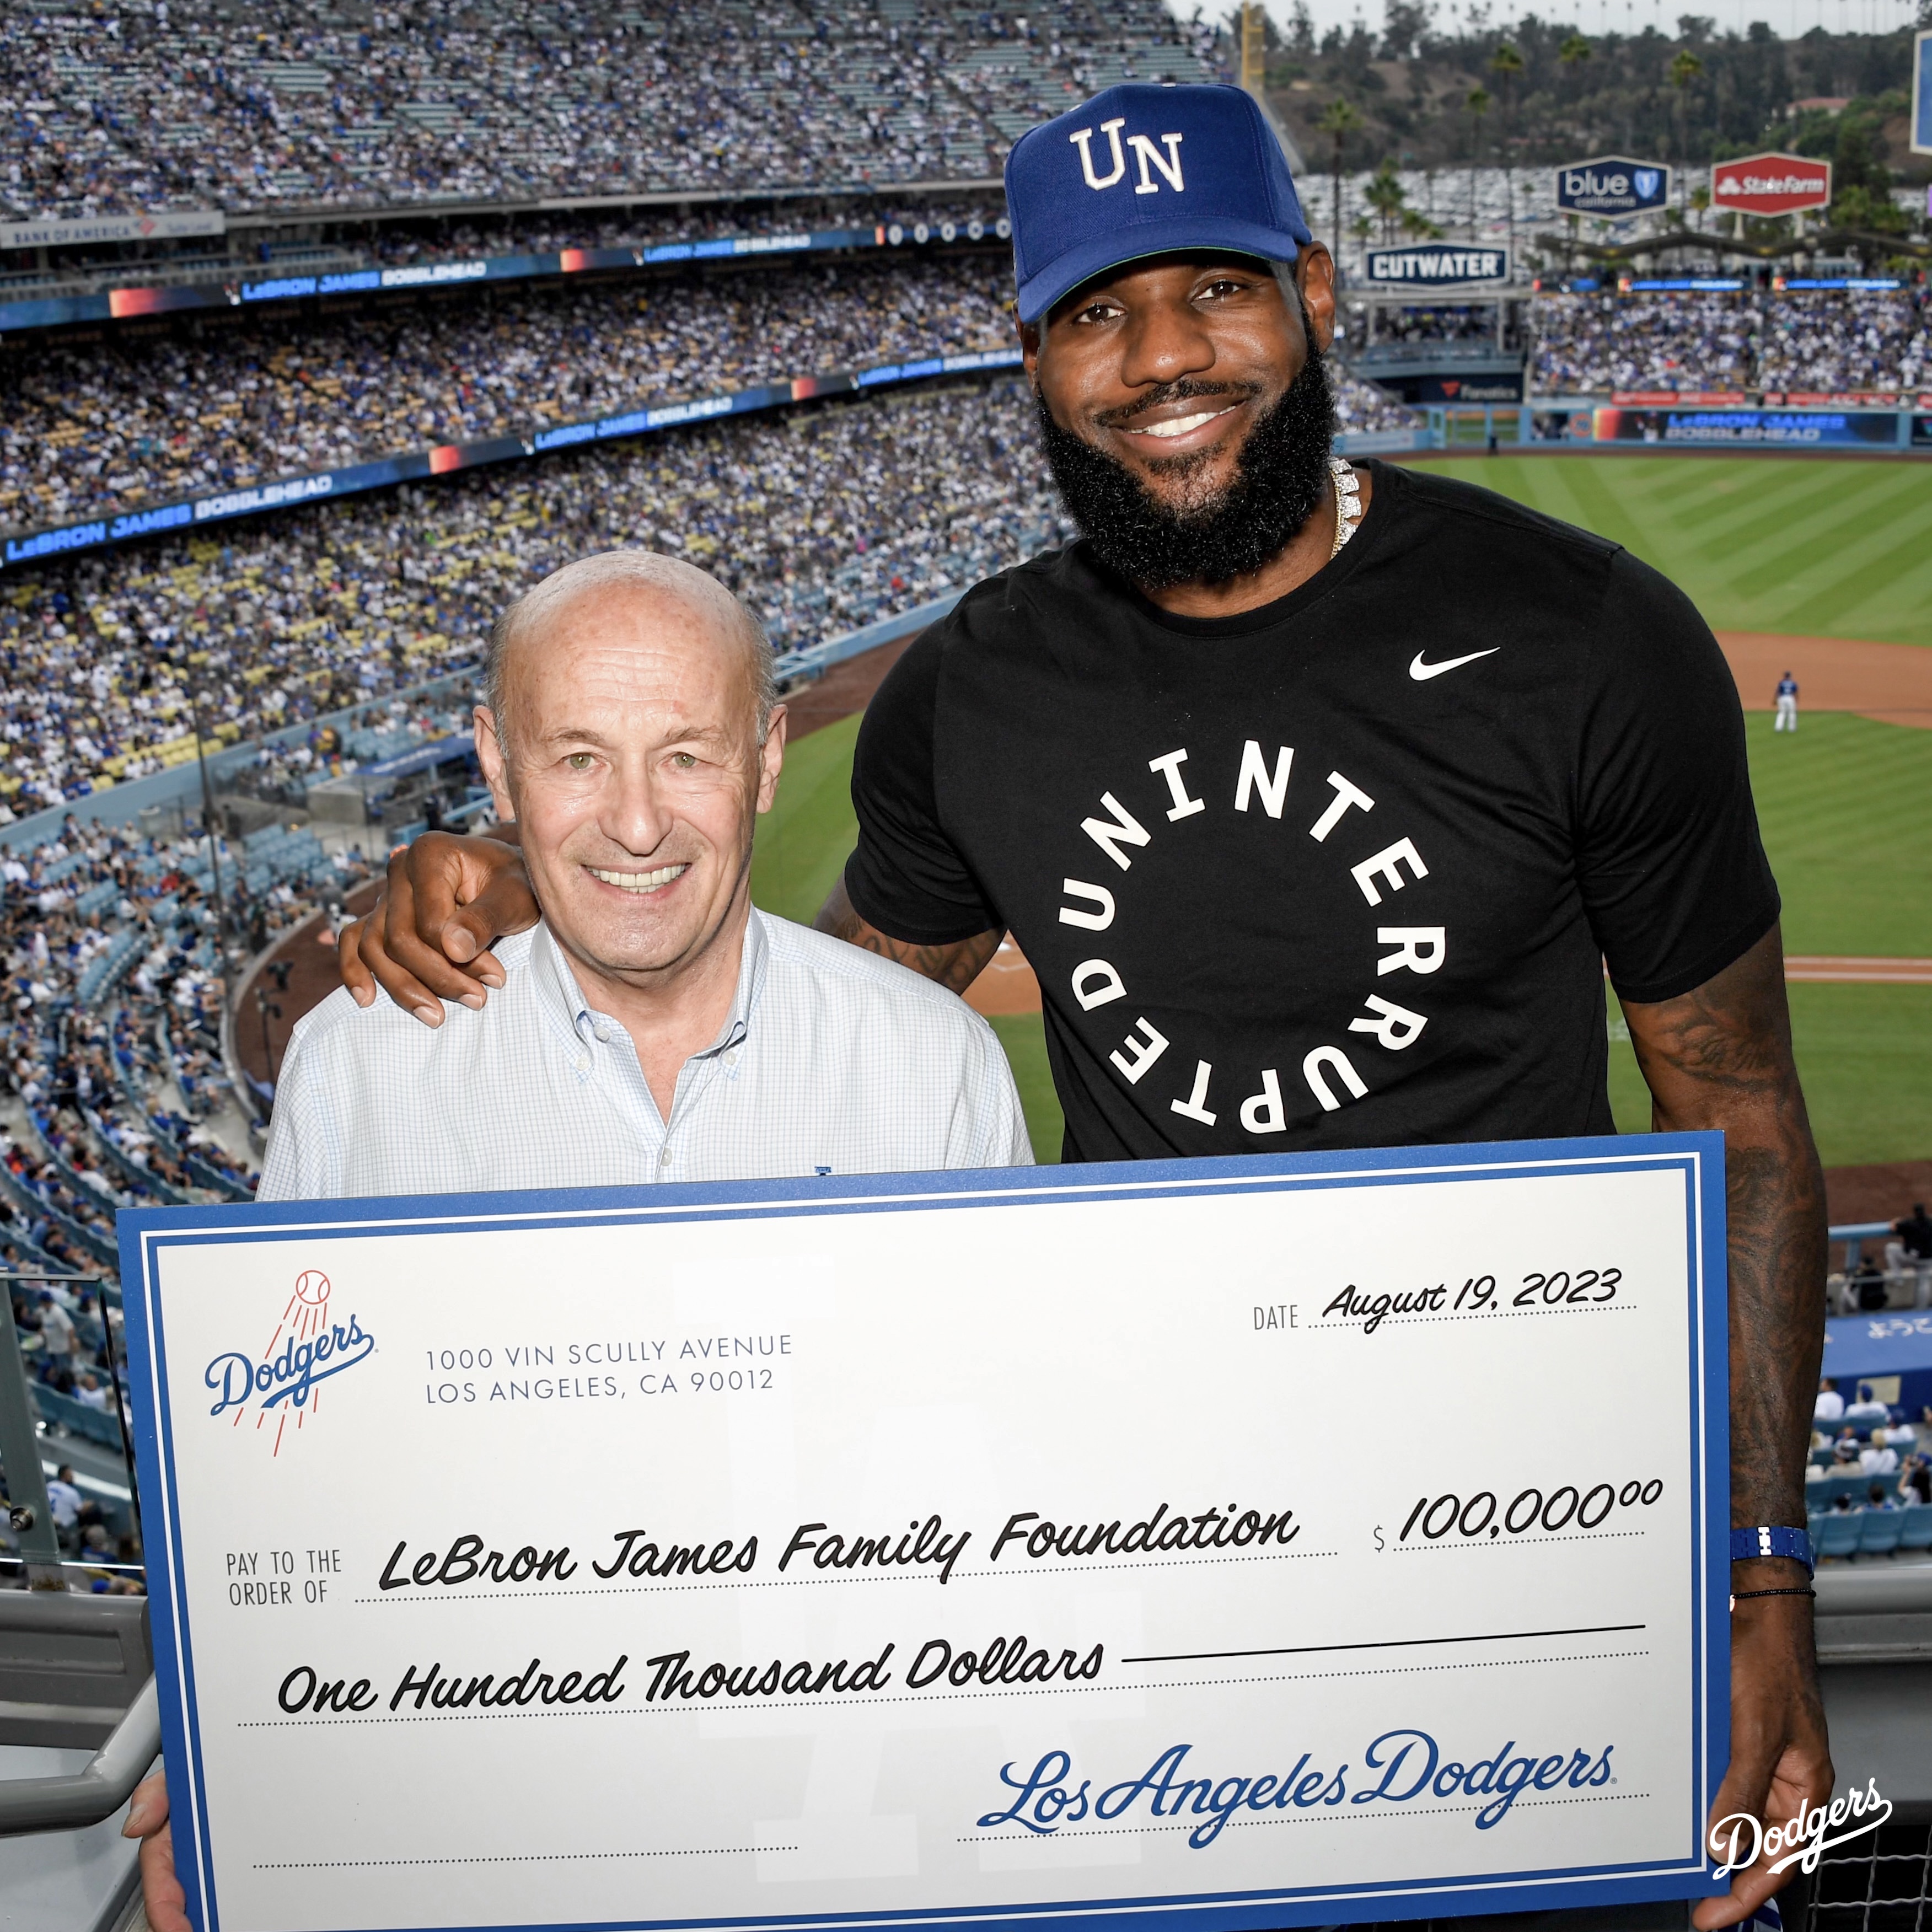 LeBron, Bronny, and the rest of the James family attended a Dodgers game on his bobblehead night